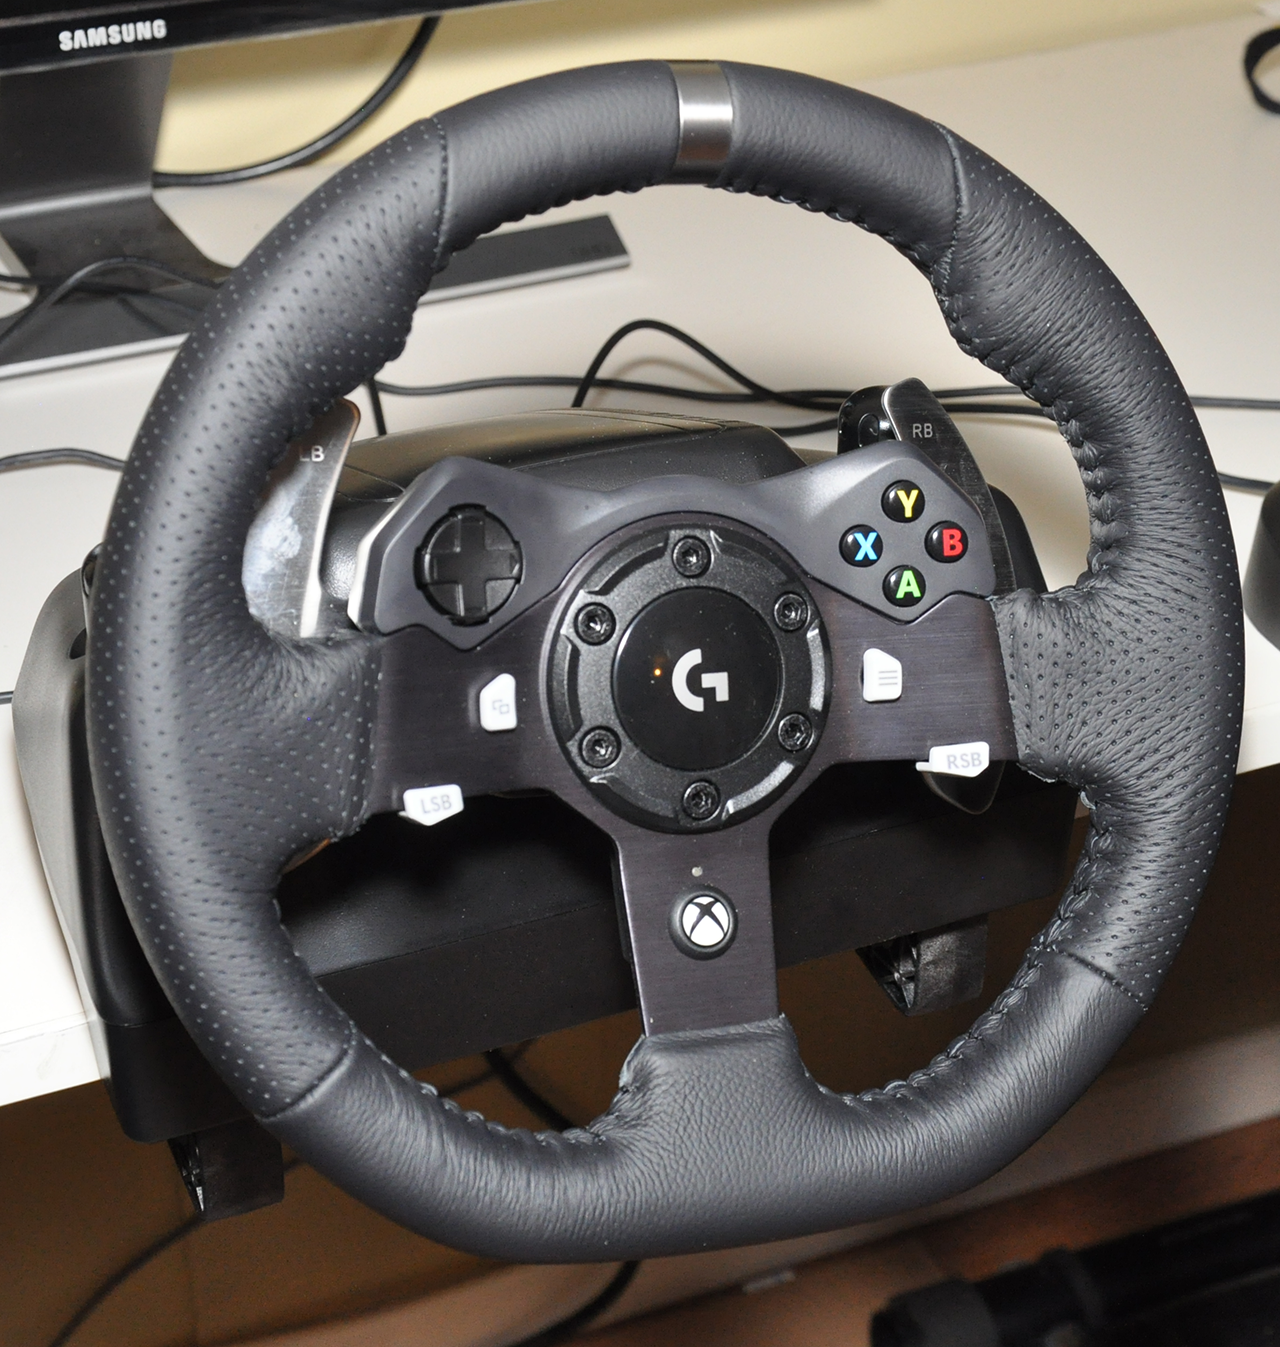 Patch Gewaad oogsten Logitech G920 Hands-on: Xbox One Gets Some Love | Tom's Hardware